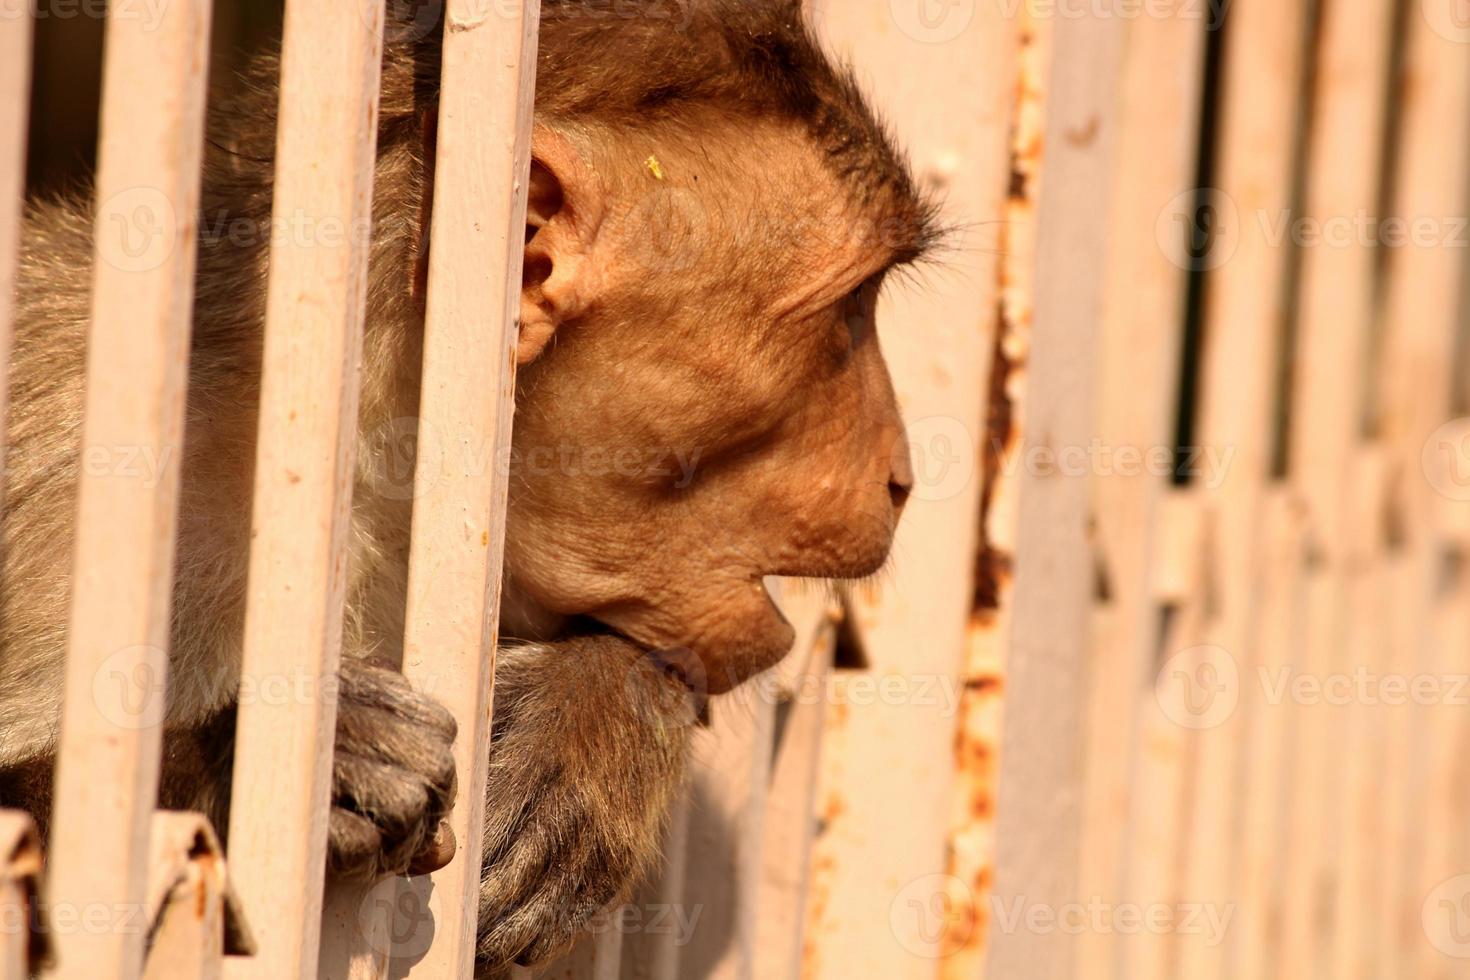 Bonnet Macaque Monkey Behind the Fence. photo